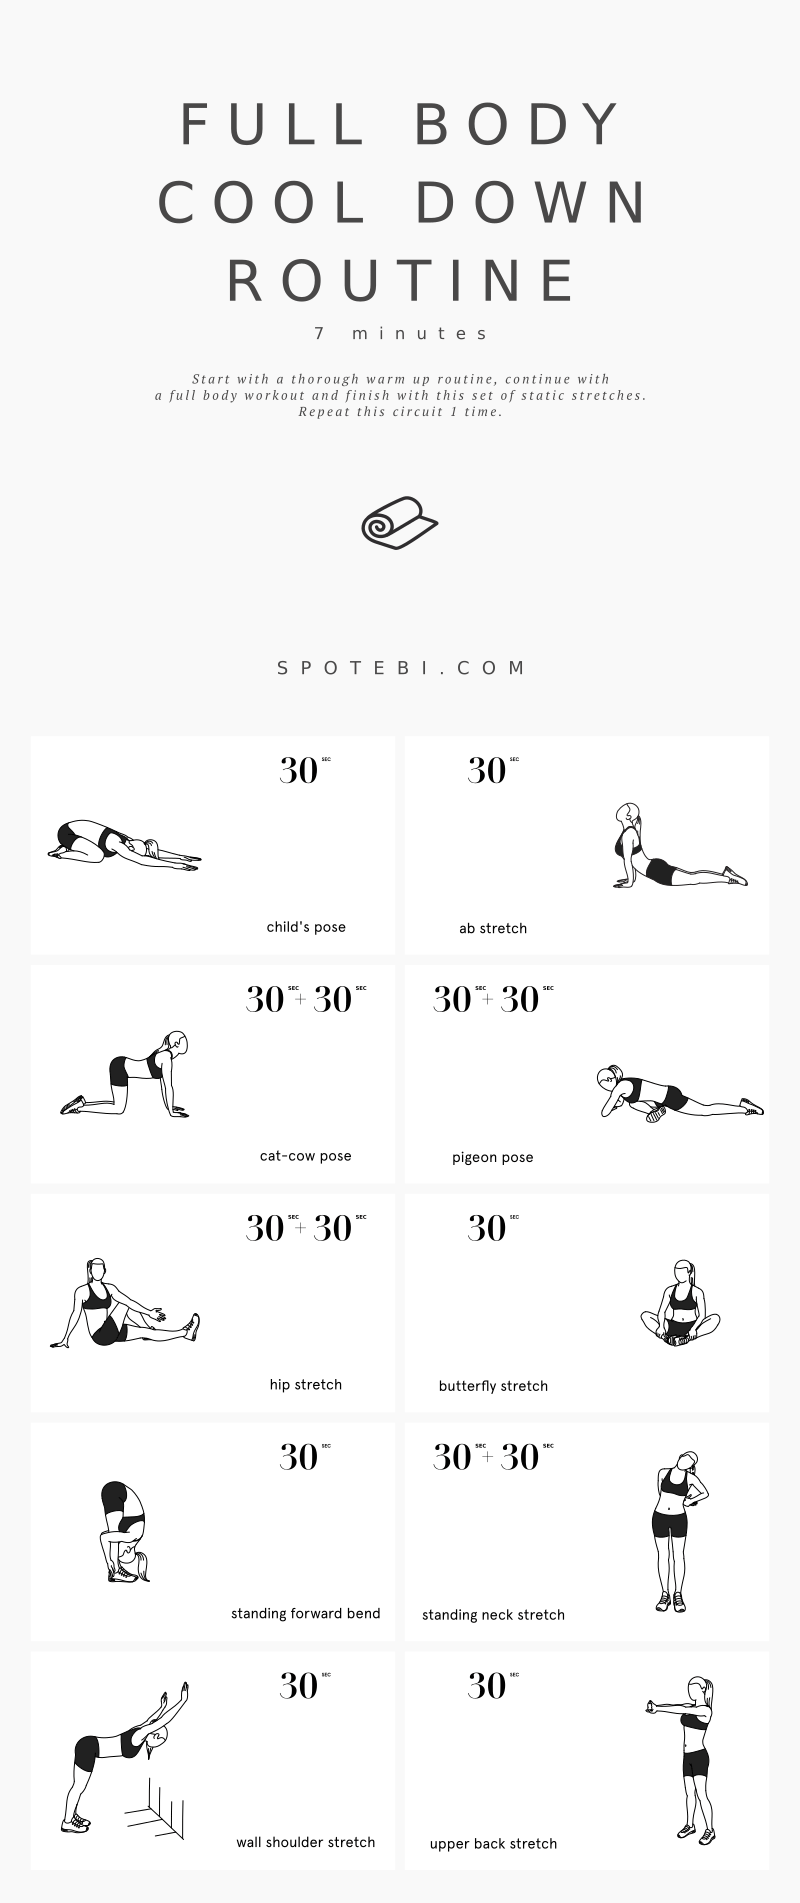 To reap all the amazing benefits of stretching, add this cool down routine at the end of your workouts and deepen each stretch with every exhalation! https://www.spotebi.com/workout-routines/at-home-full-body-cool-down-routine/